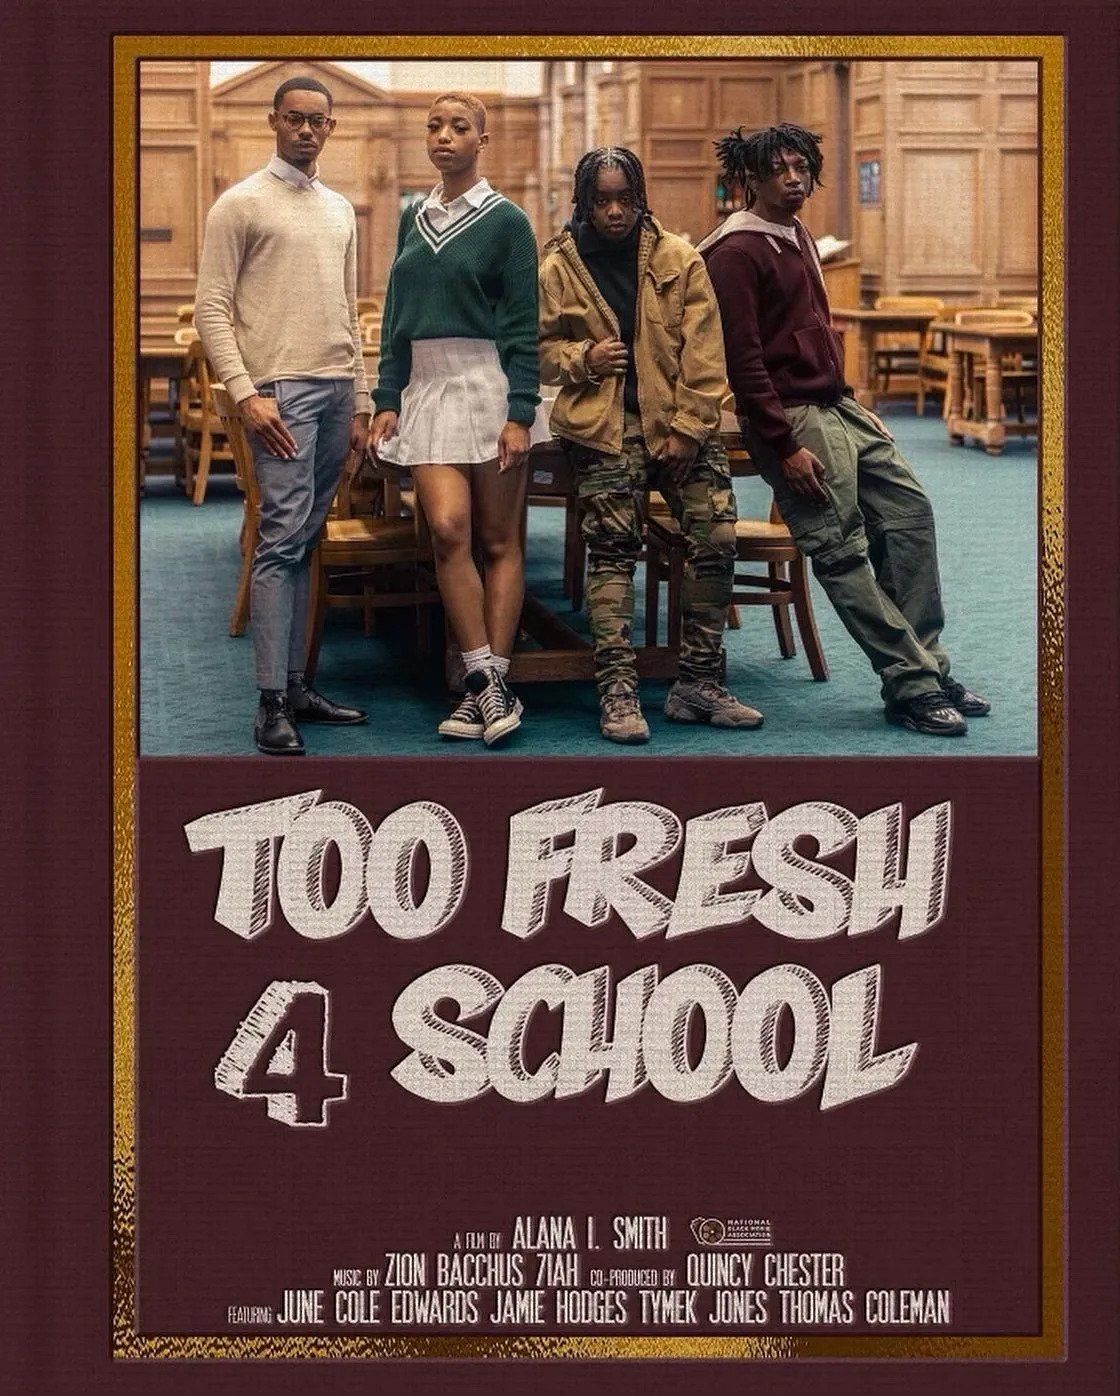 Too Fresh 4 School - A Short Film Written And Directed By Young Filmmaker, Alana I. Smith